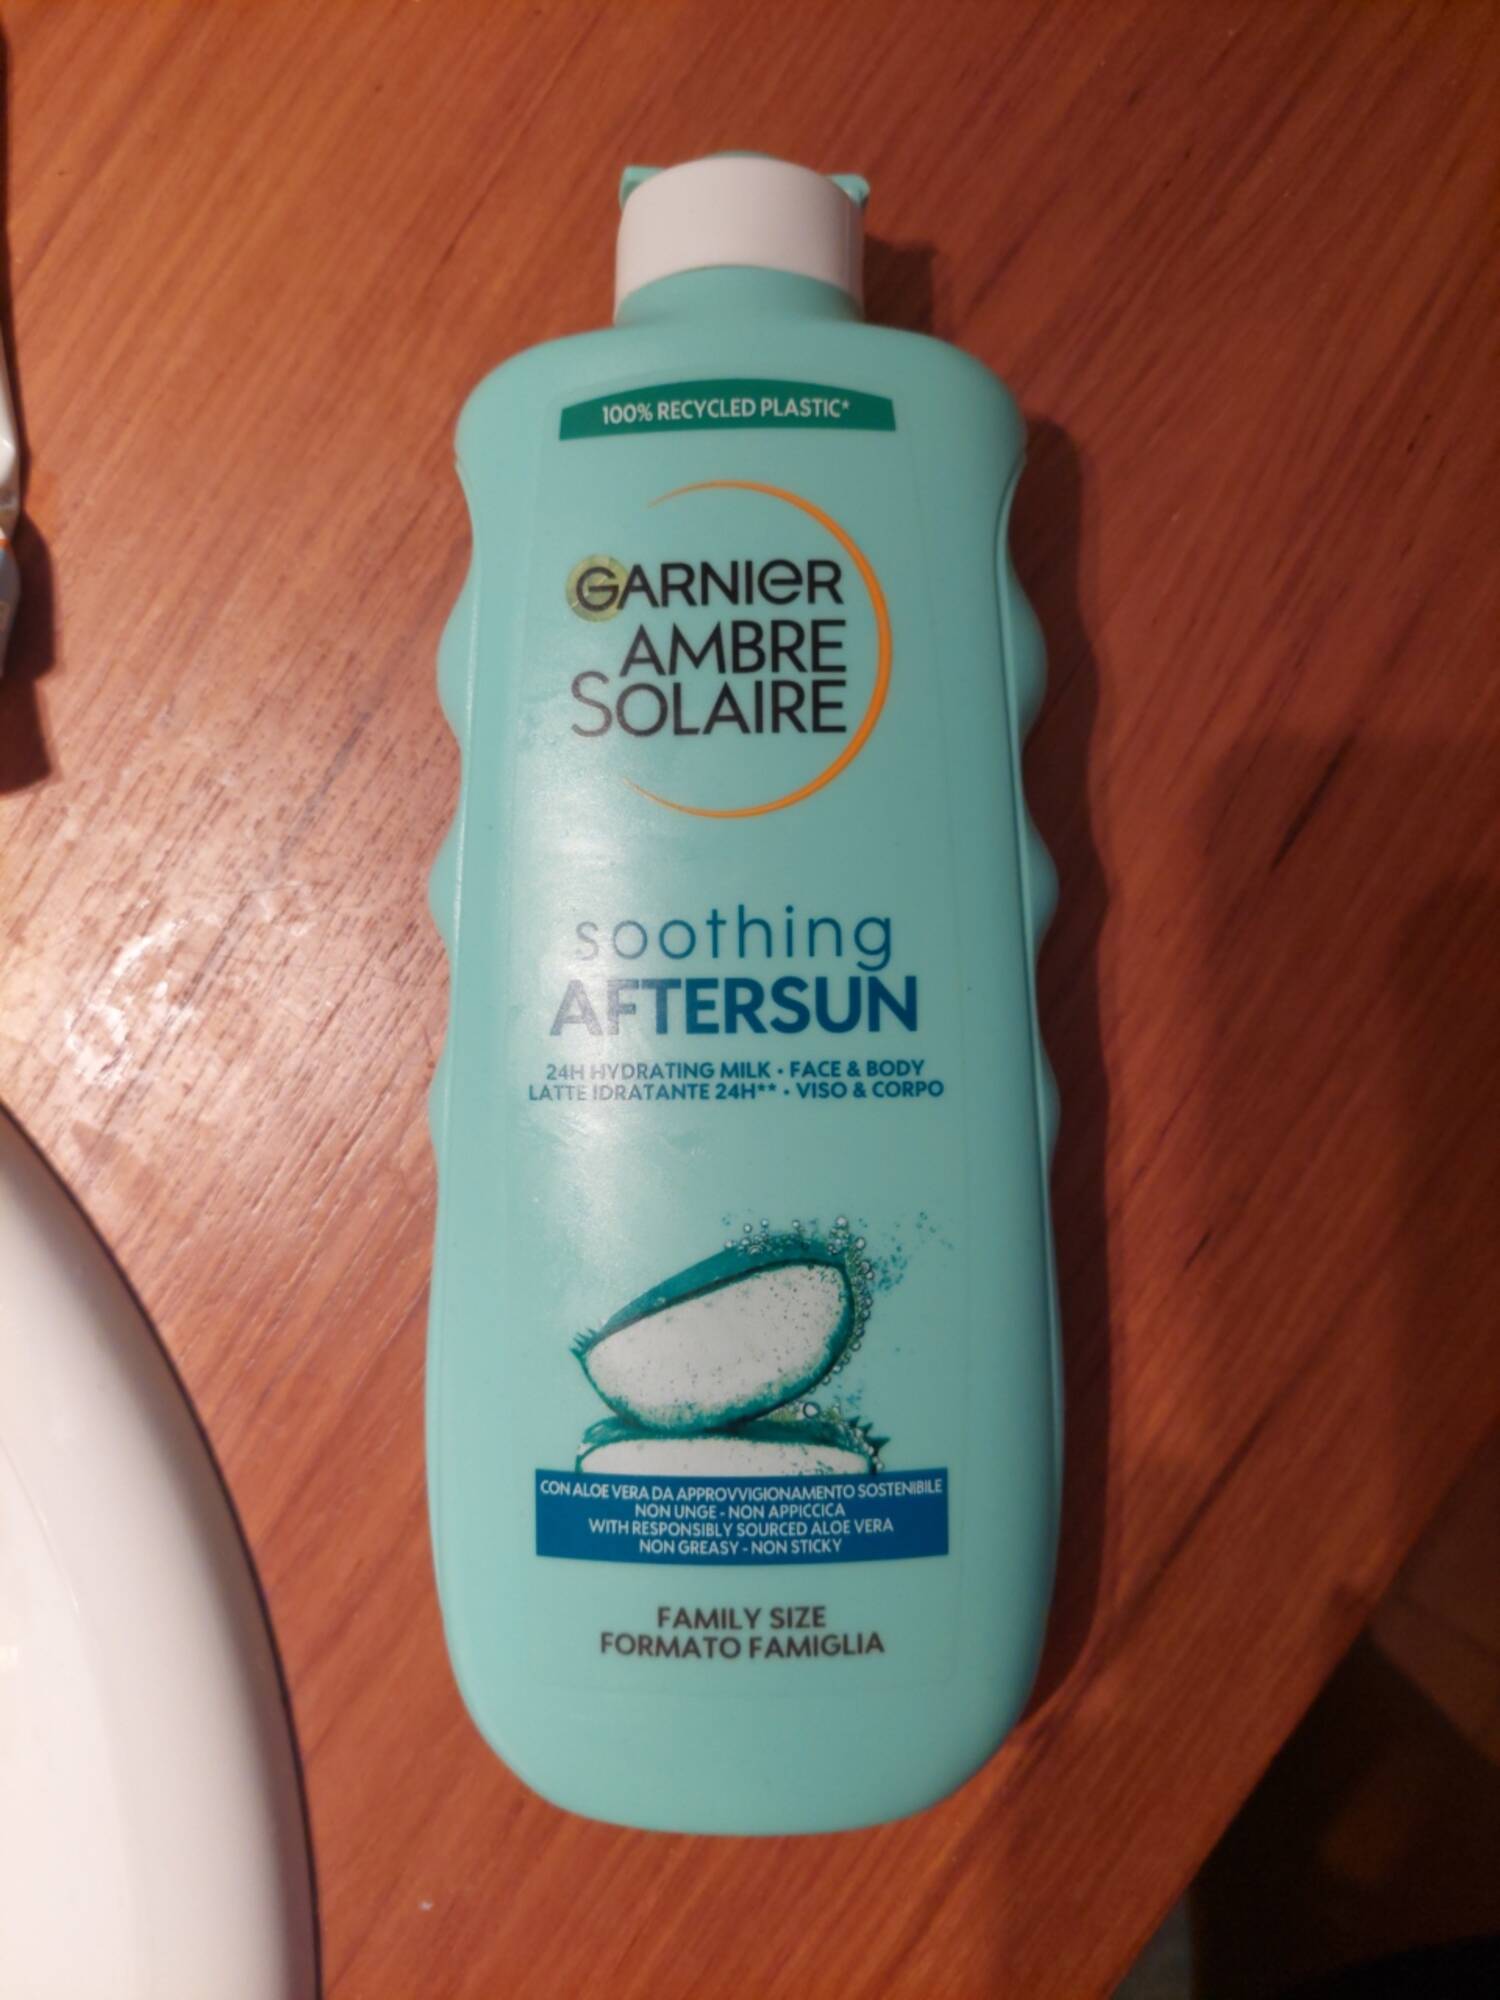 GARNIER - Ambre solaire - Soothing aftersun 24h hydrating milk